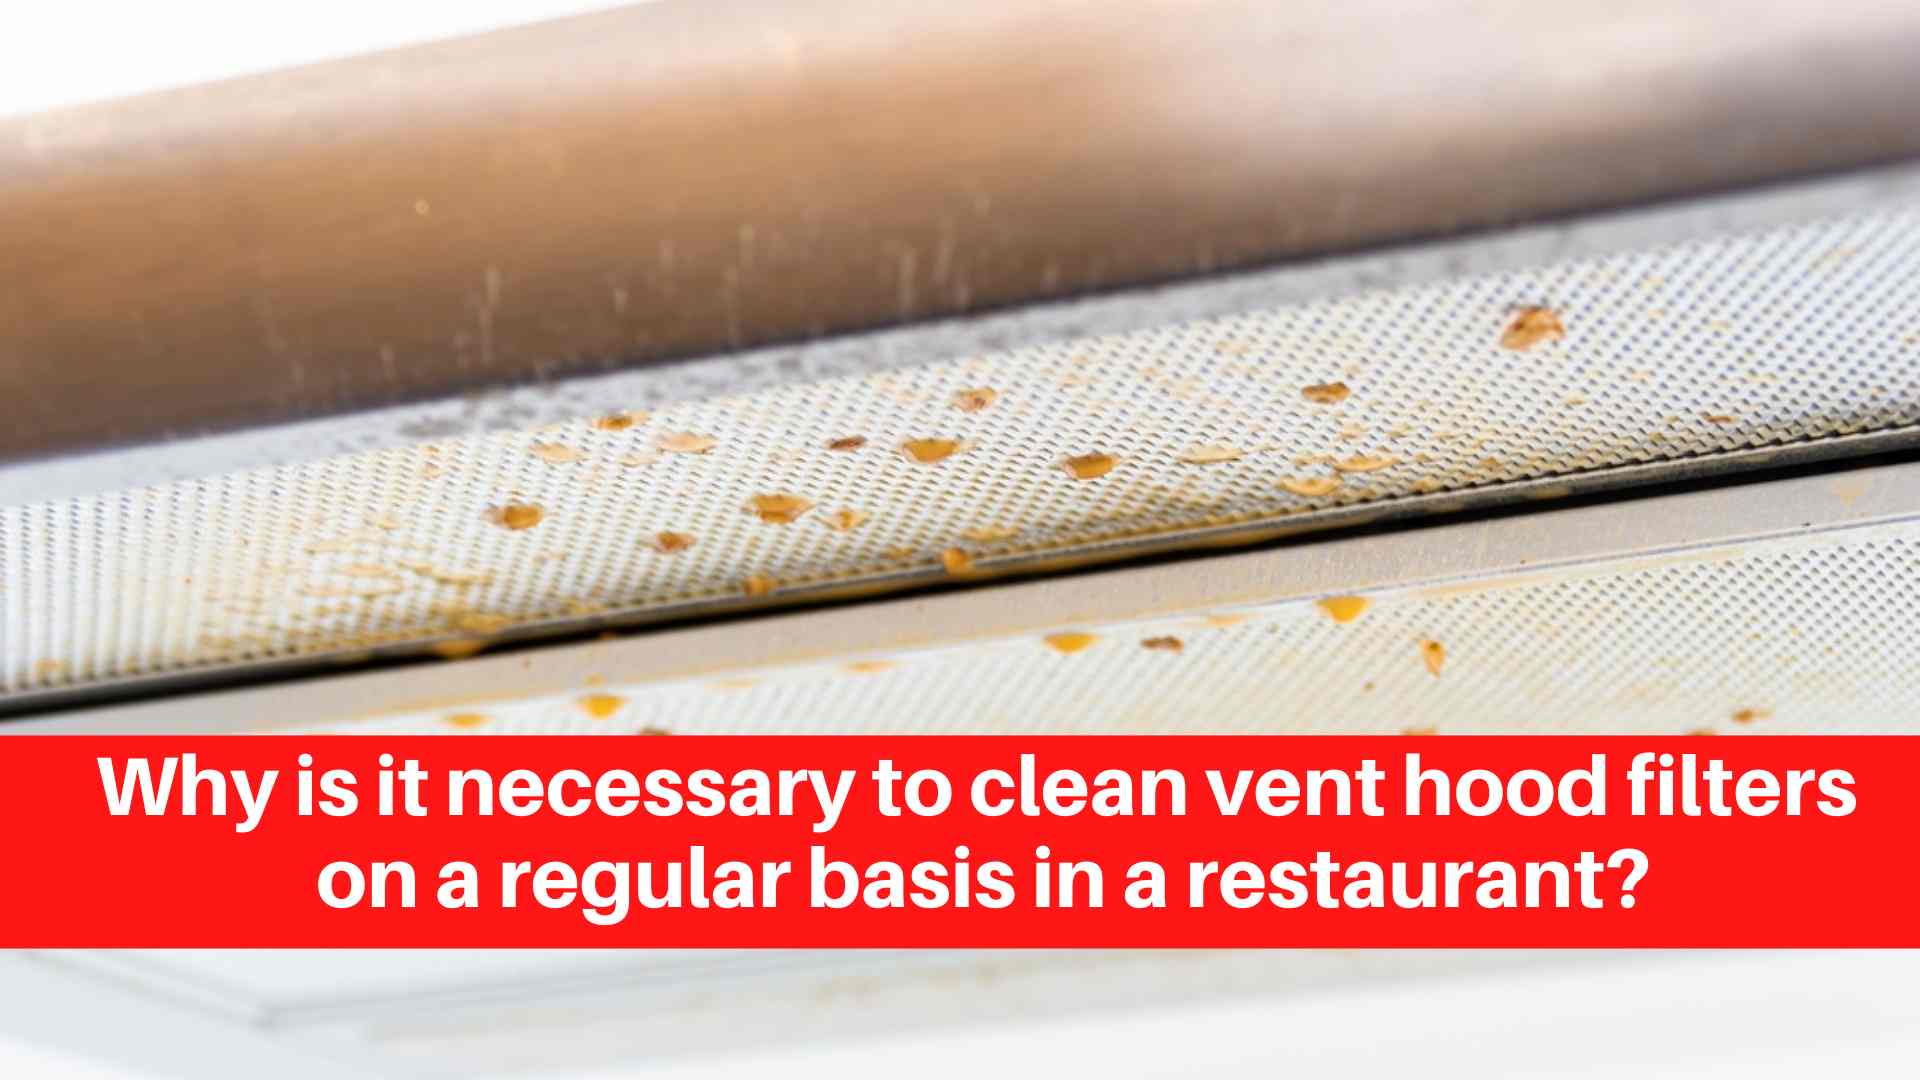 Why is it necessary to clean vent hood filters on a regular basis in a restaurant